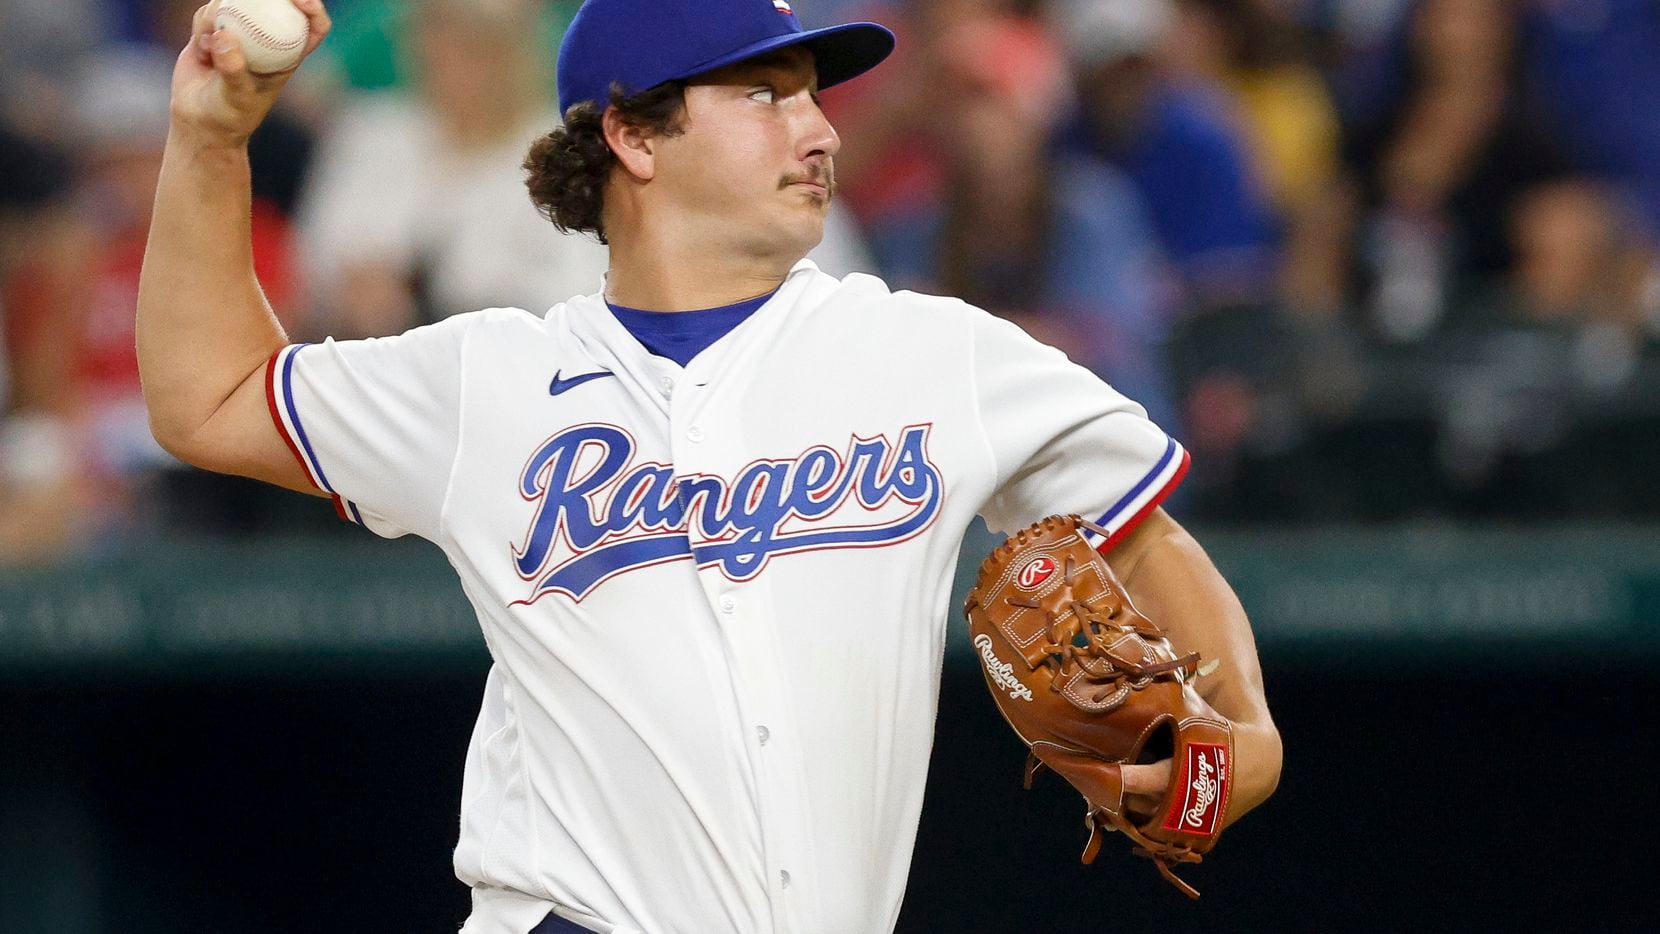 Fruit groente hack Aarzelen Rangers' top pitching prospect Owen White named to All-Stars Futures Game